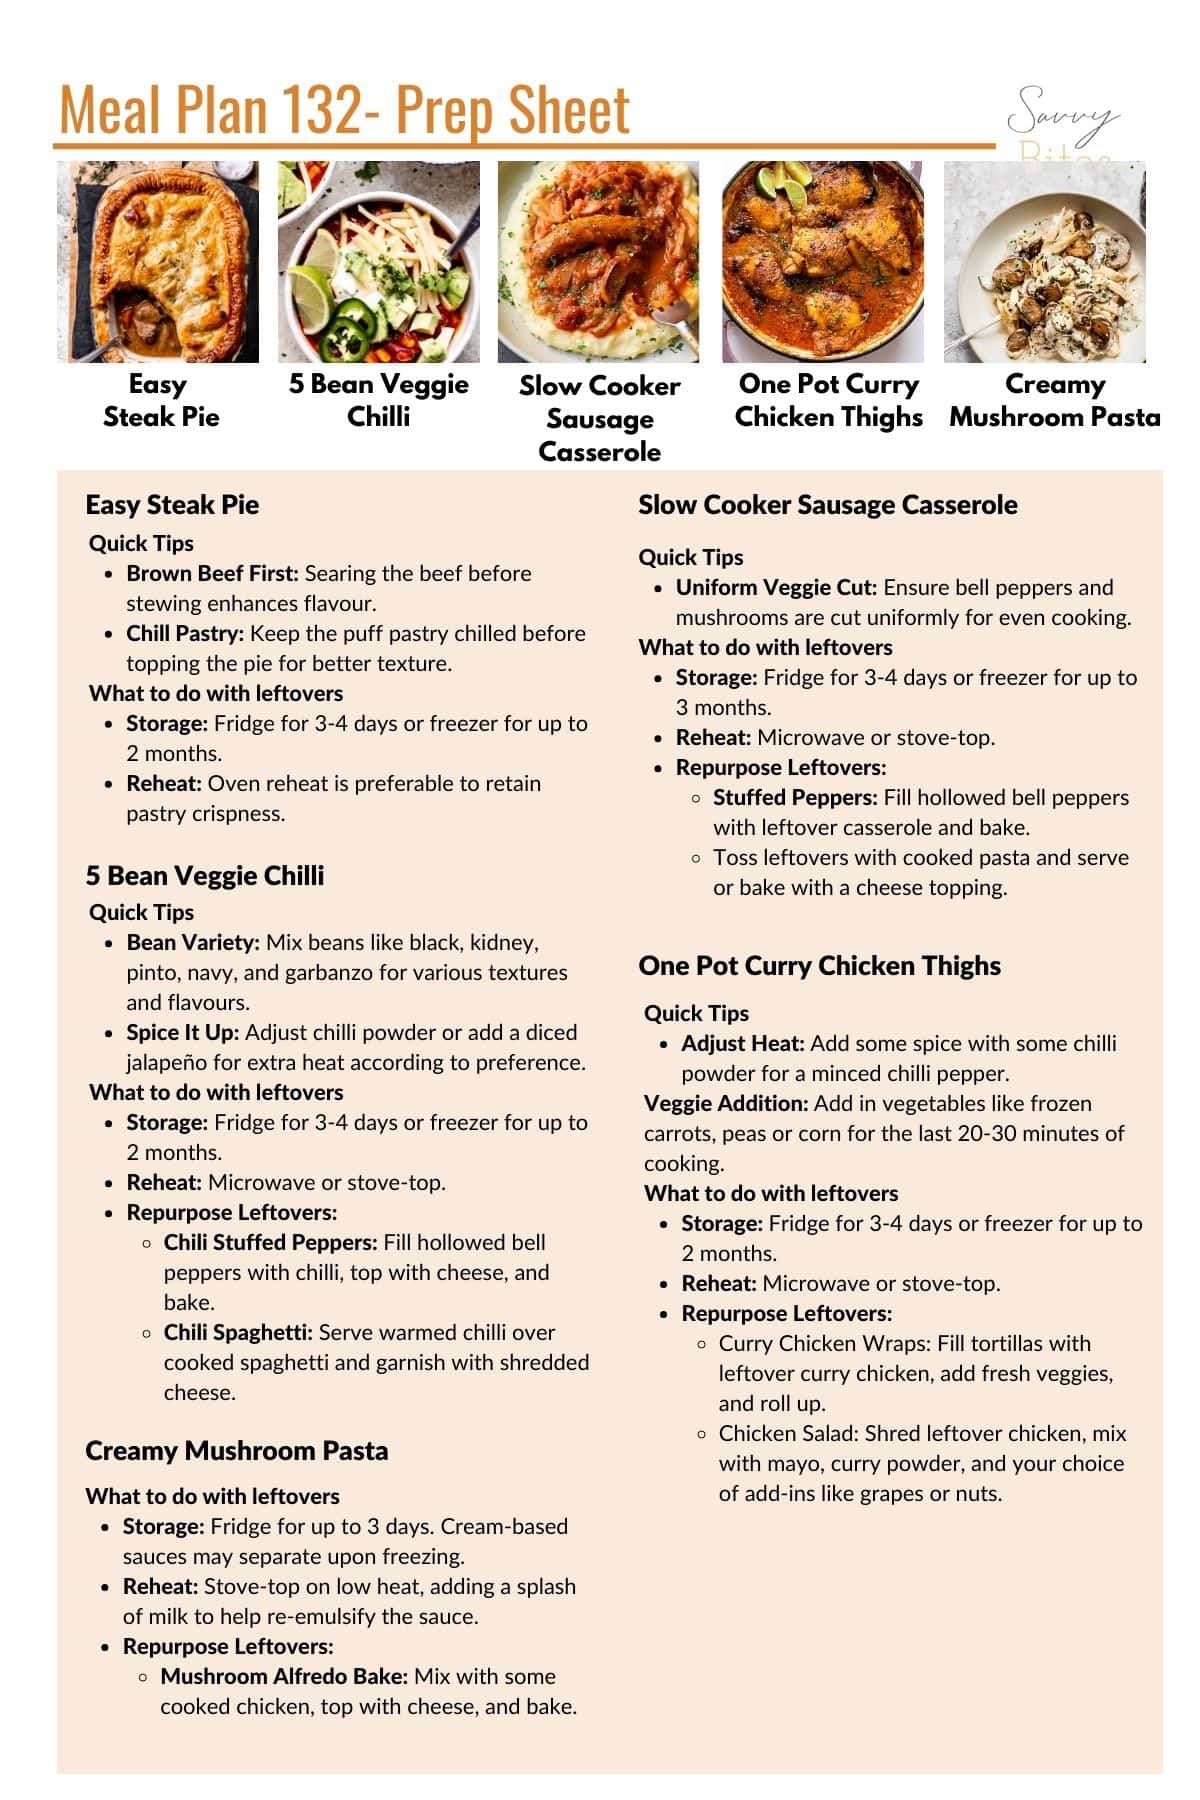 Tip sheet for budget meal plan 132 with Aldi recipes.